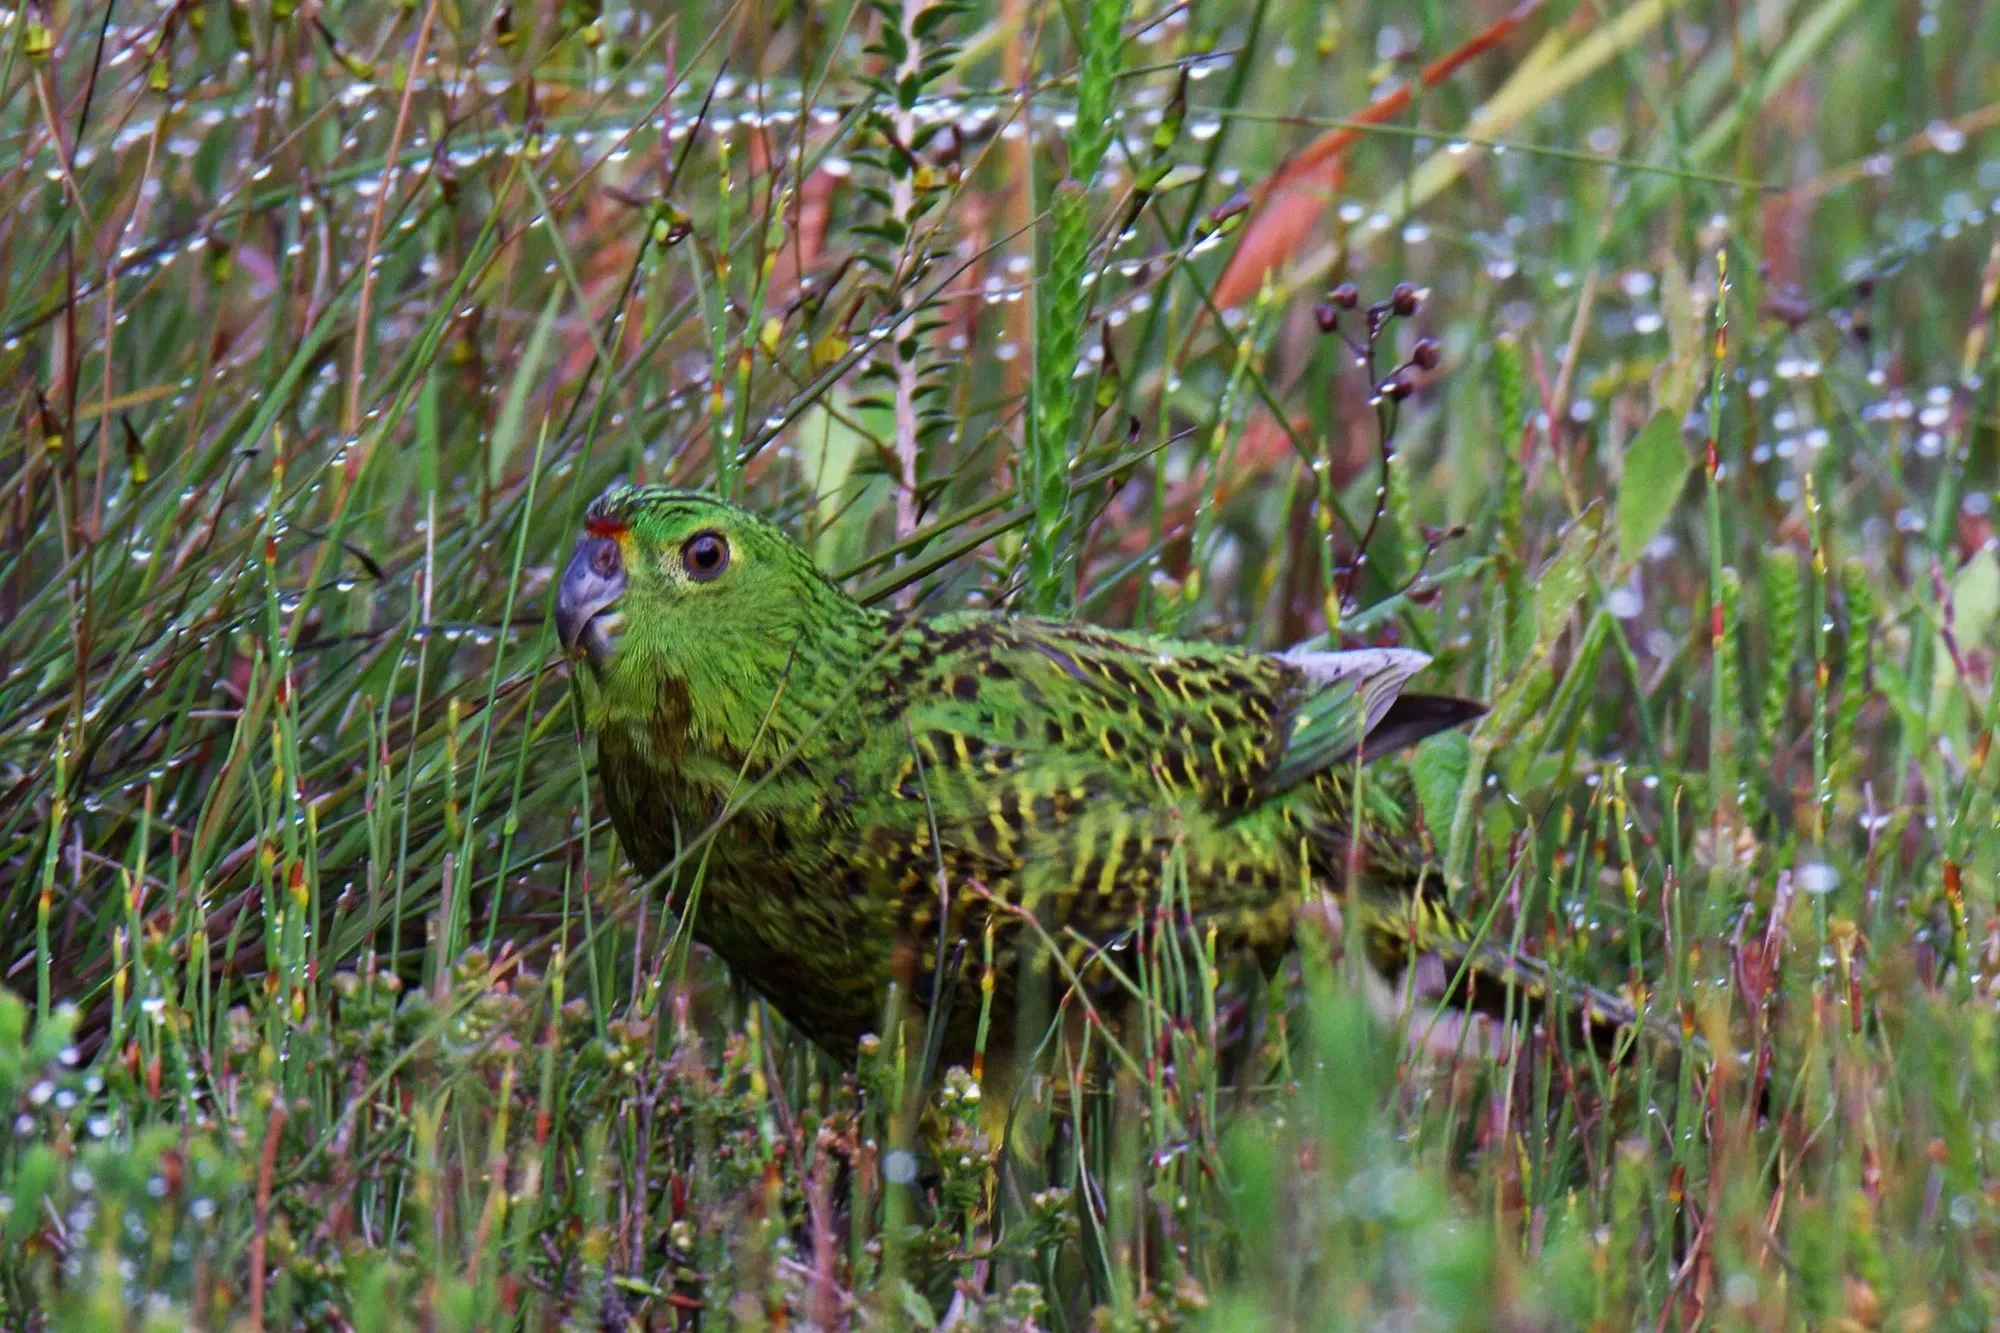 The Eastern ground parrot is a colorful bird.